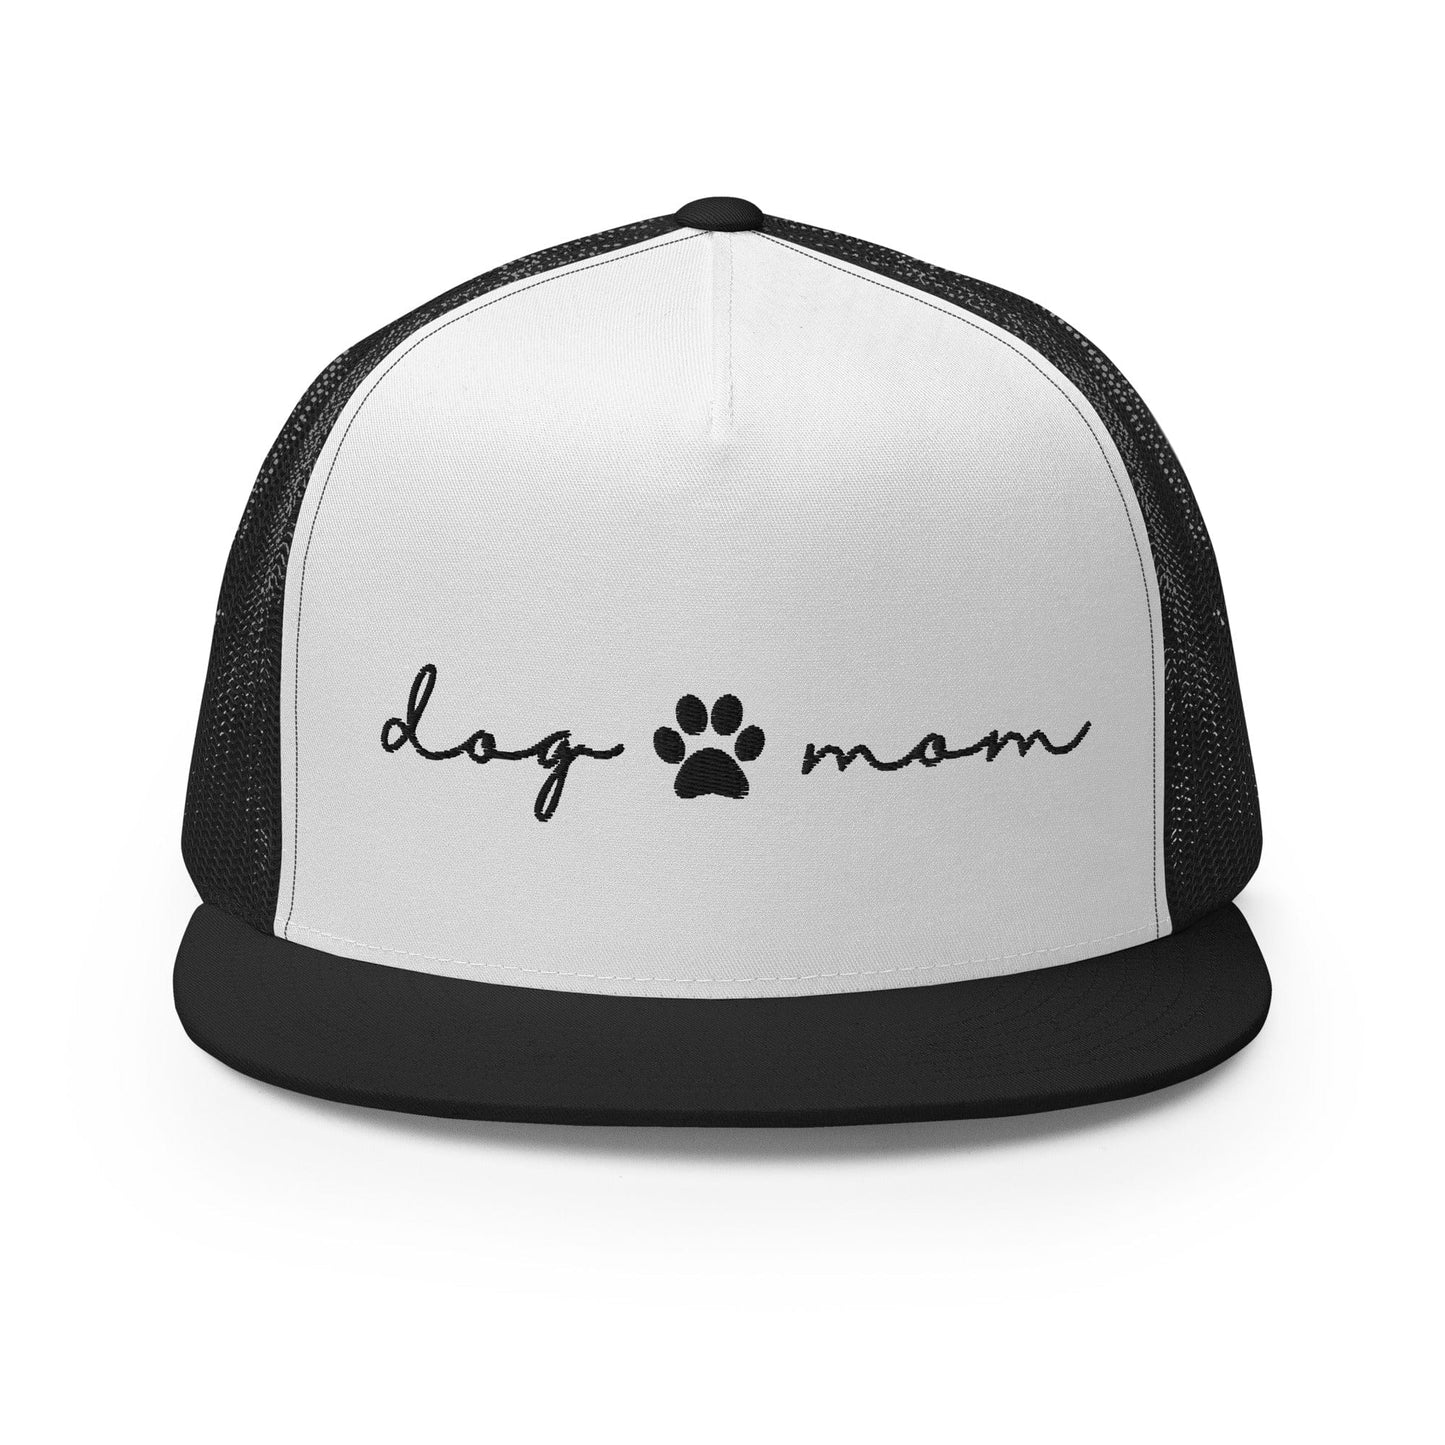 Trucker Hats for Proud Pet Parent: Stylish Statements for Dog Moms and Dads